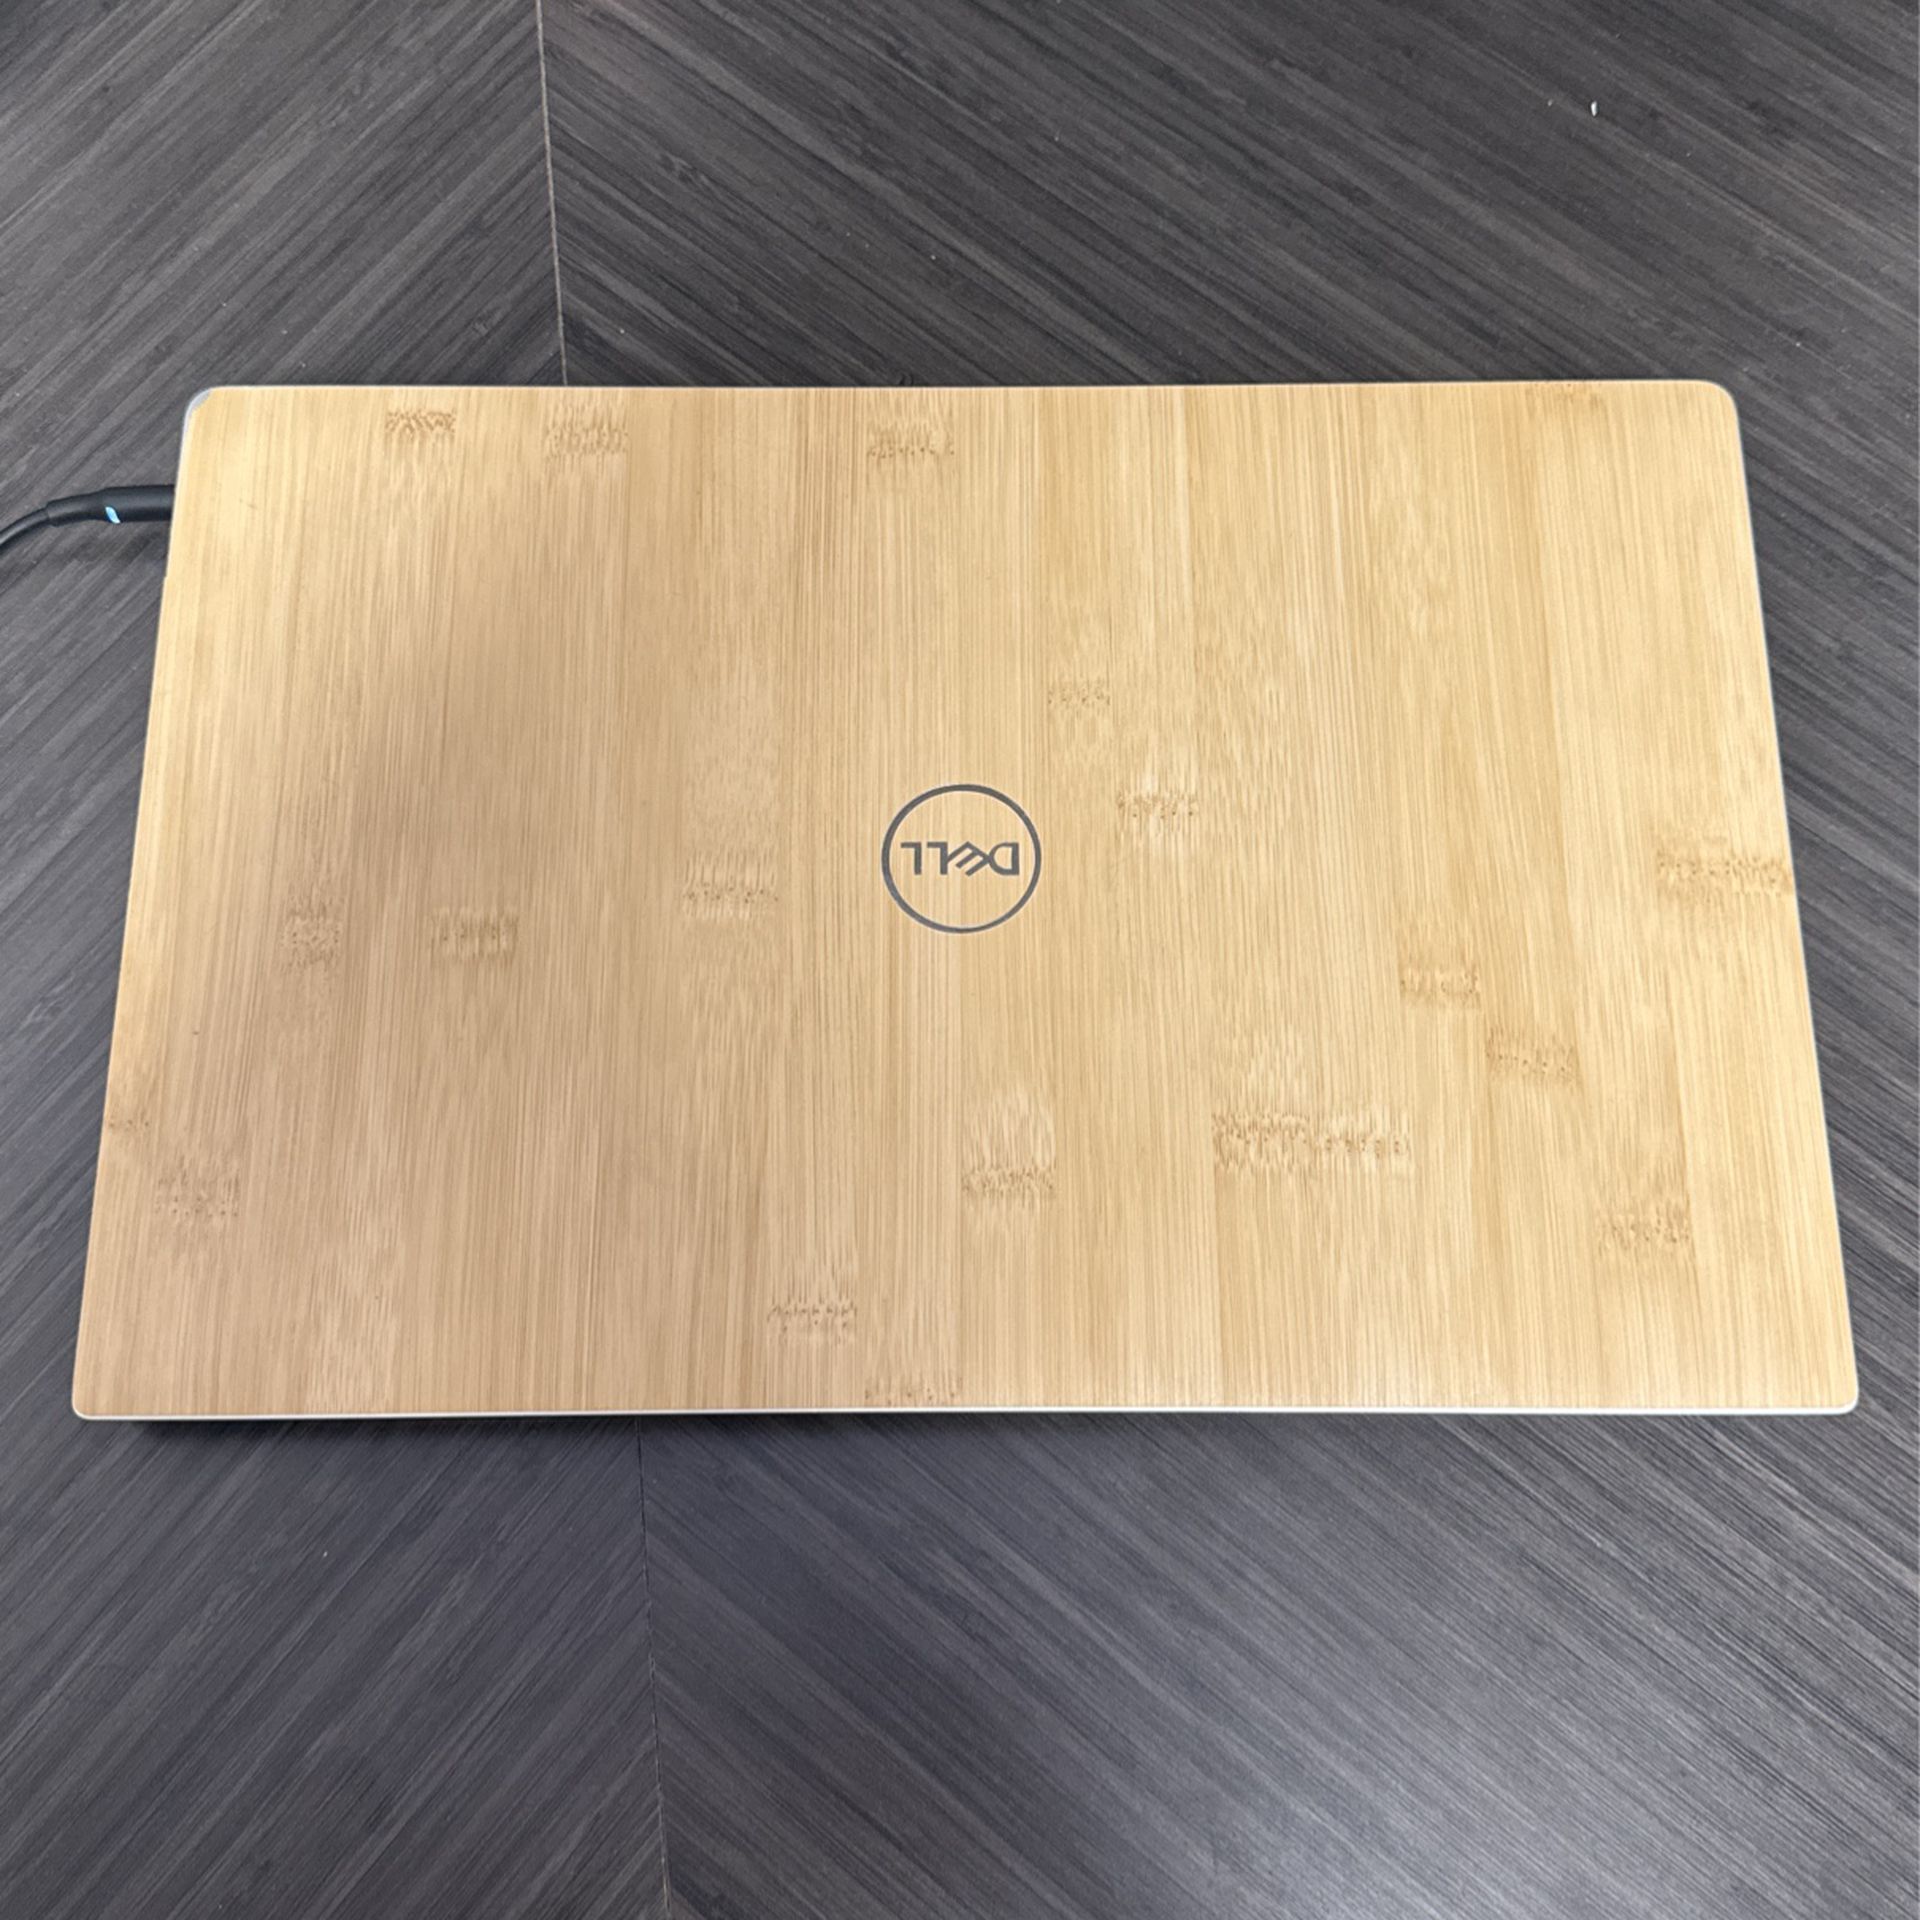 Dell Xps 15 